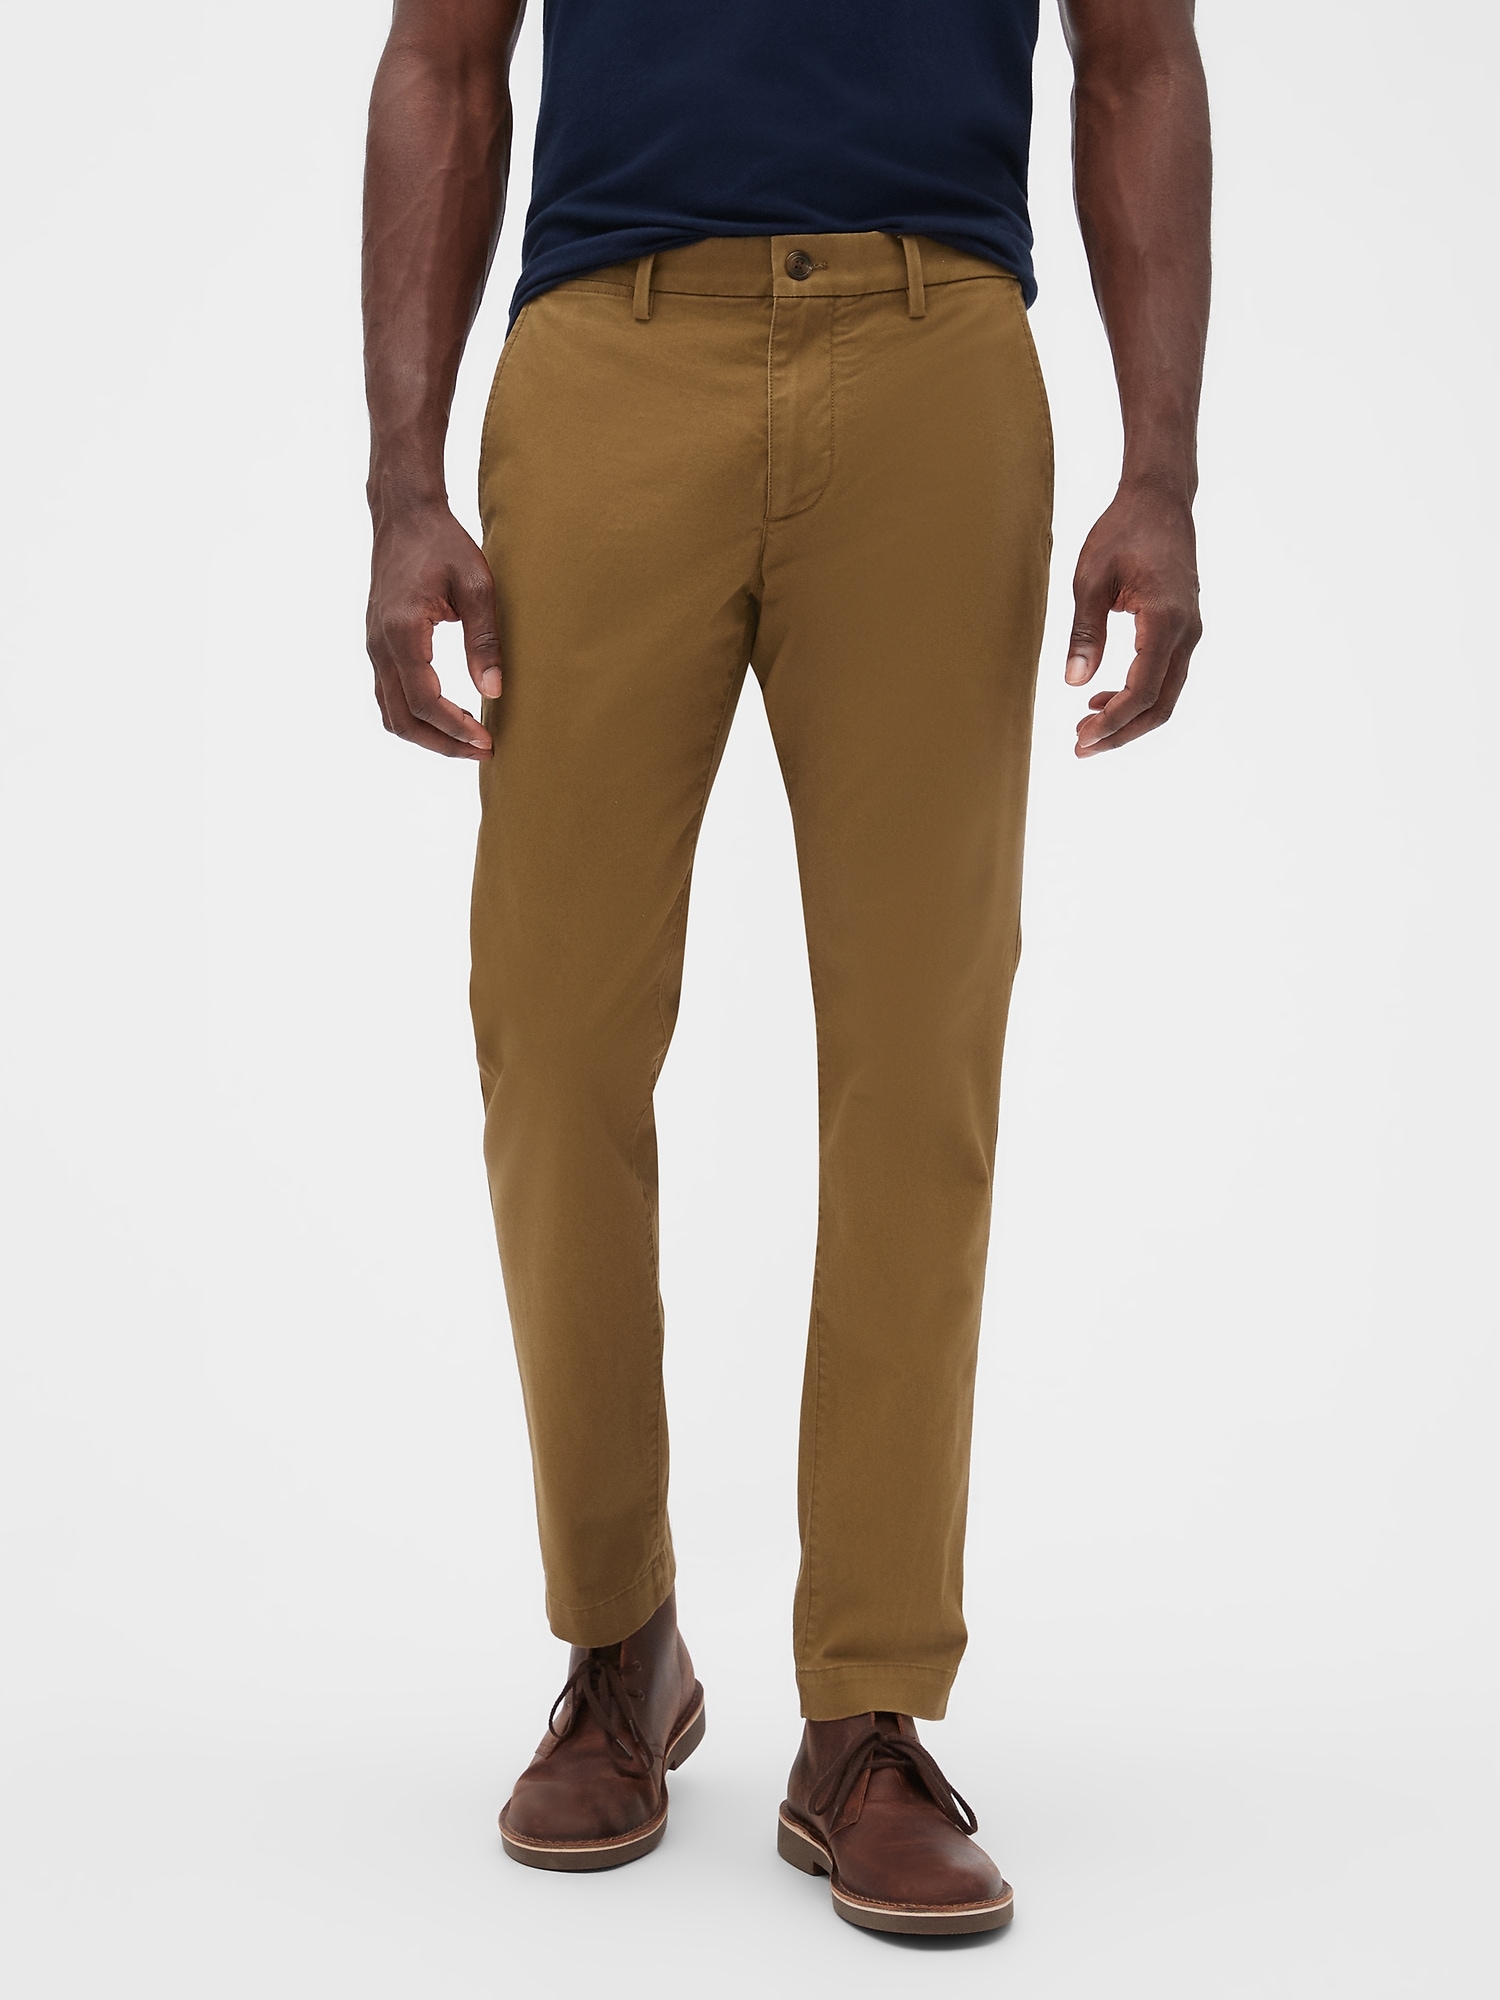 GapFlex Essential Khakis in Skinny Fit with Washwell | Gap Factory